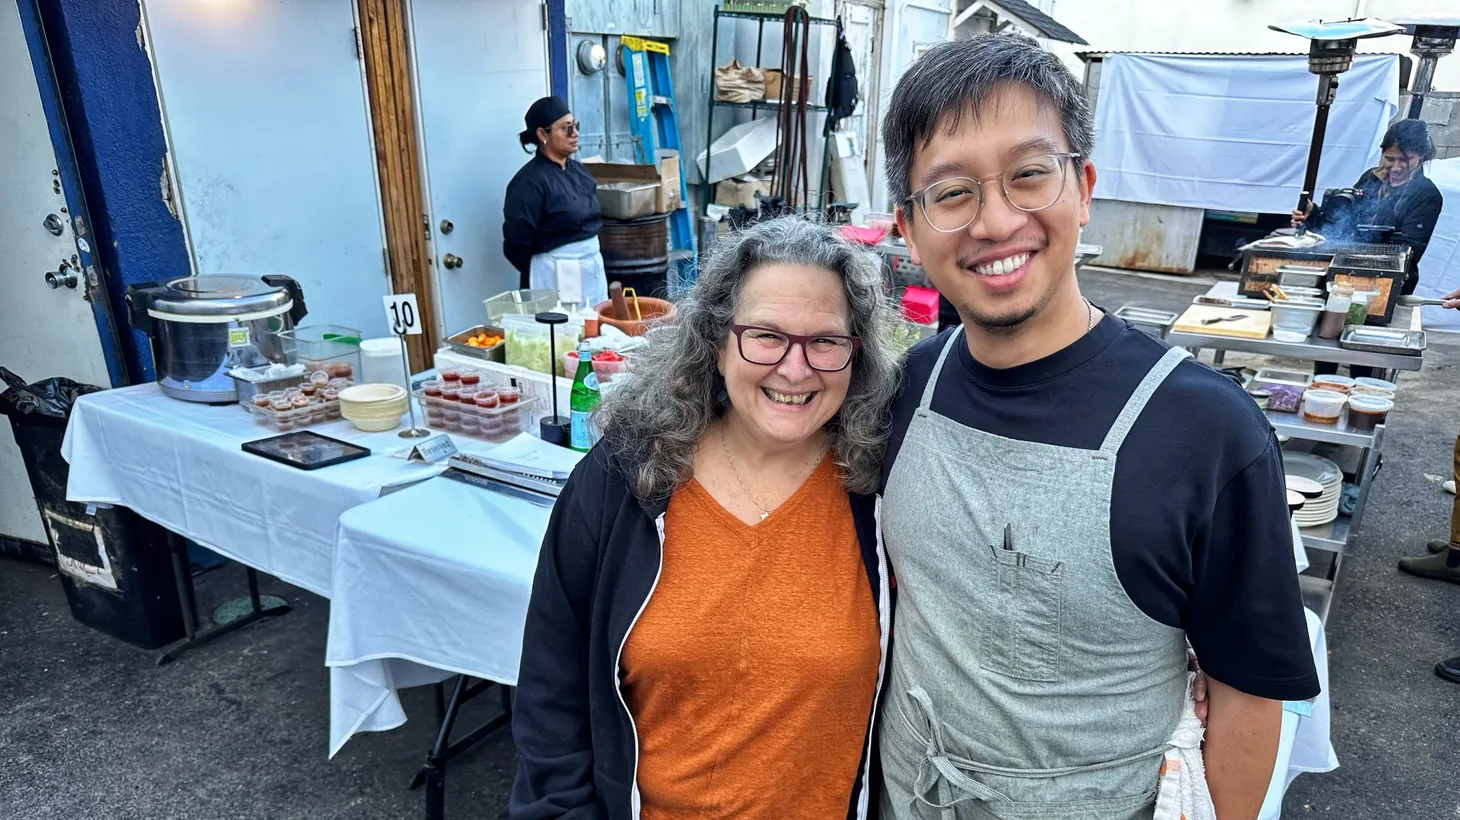 Good Food host Evan Kleiman (left) and Anajak Thai chef Justin Pichetrungsi at the restaurant's Taco Tuesday night, which is served outside in the alley.